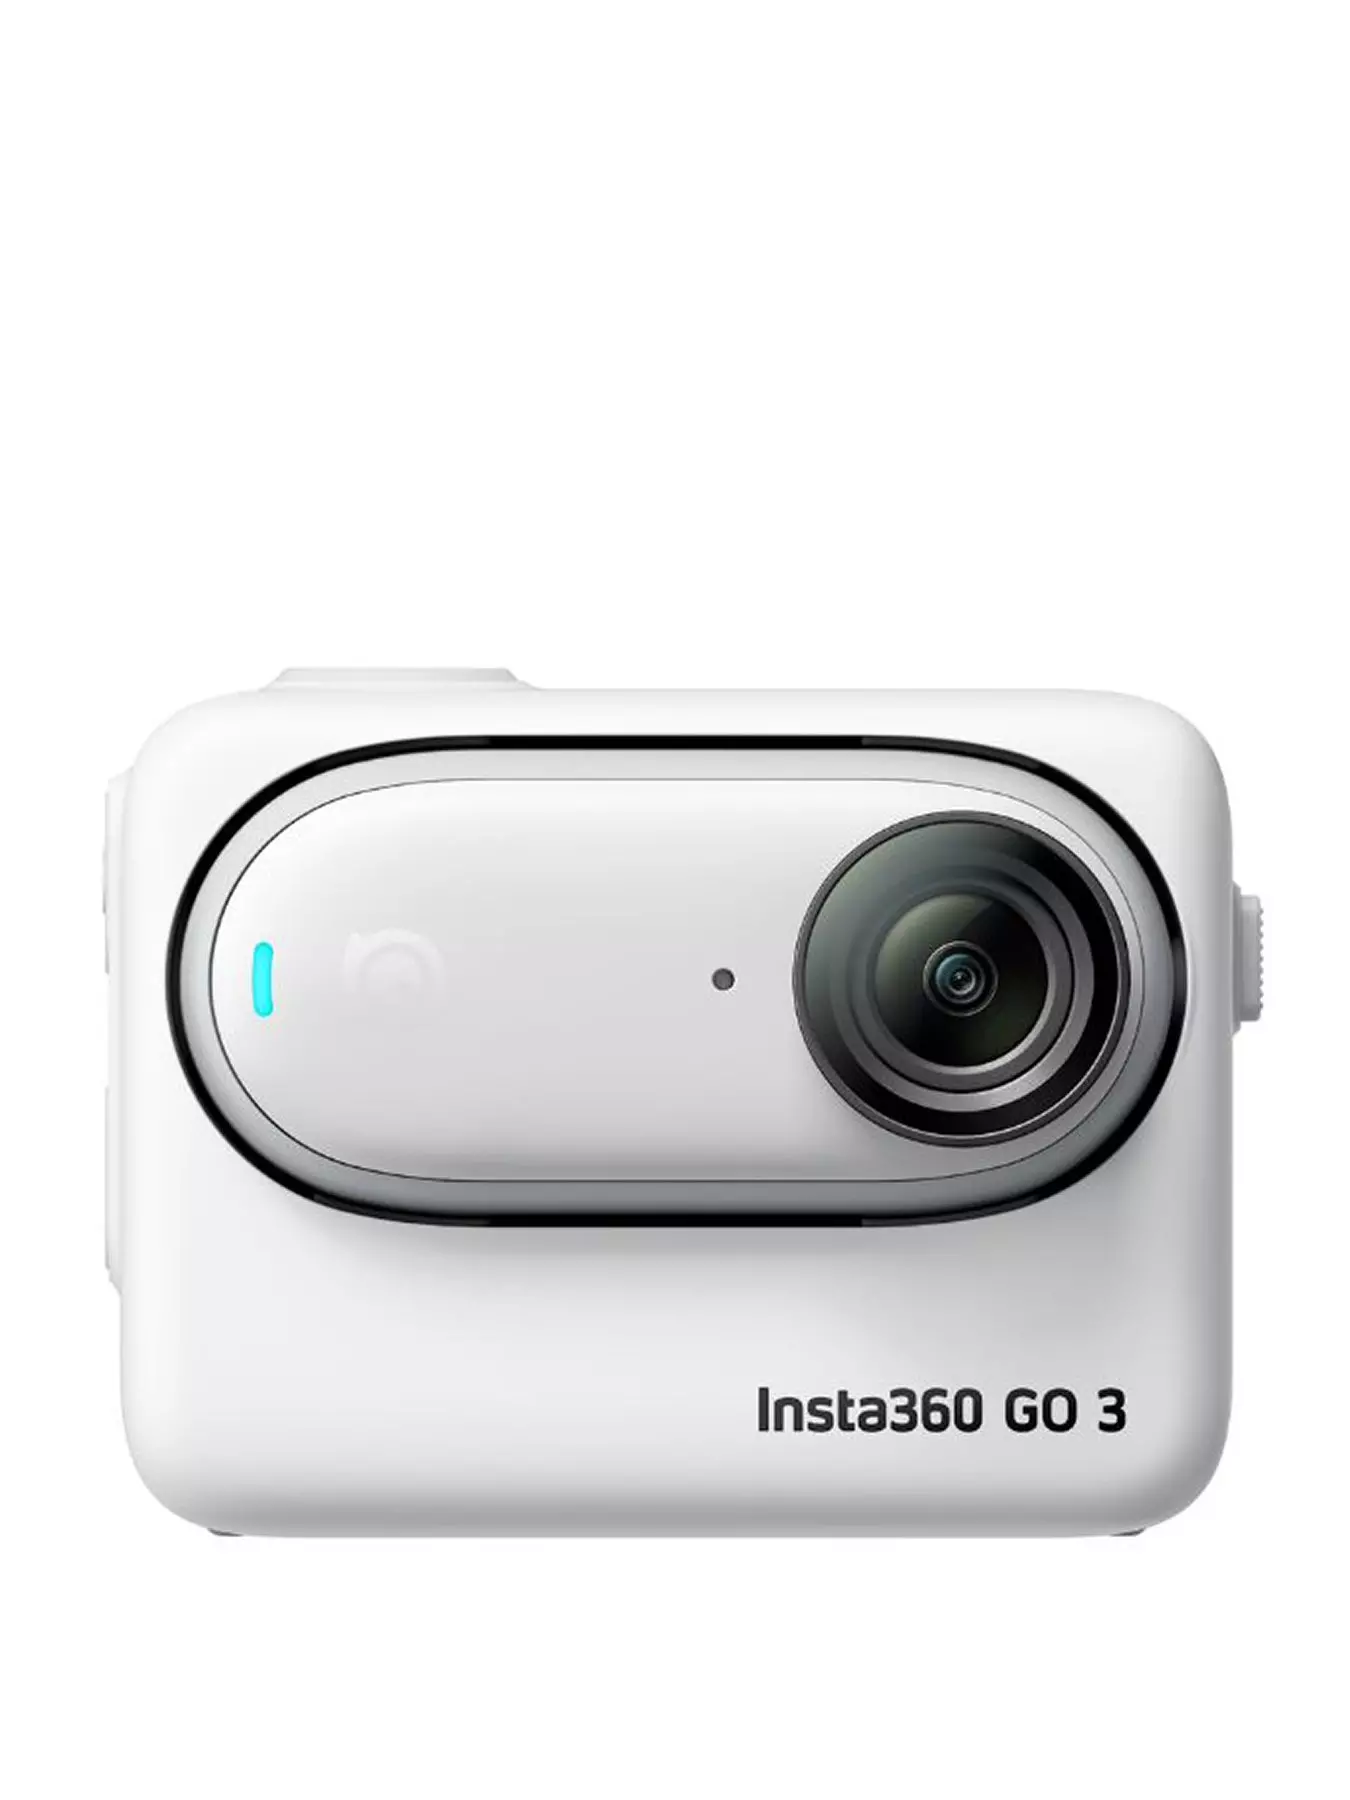 The tiny Insta360 Go 3 magnetic action camera has a very cool party trick